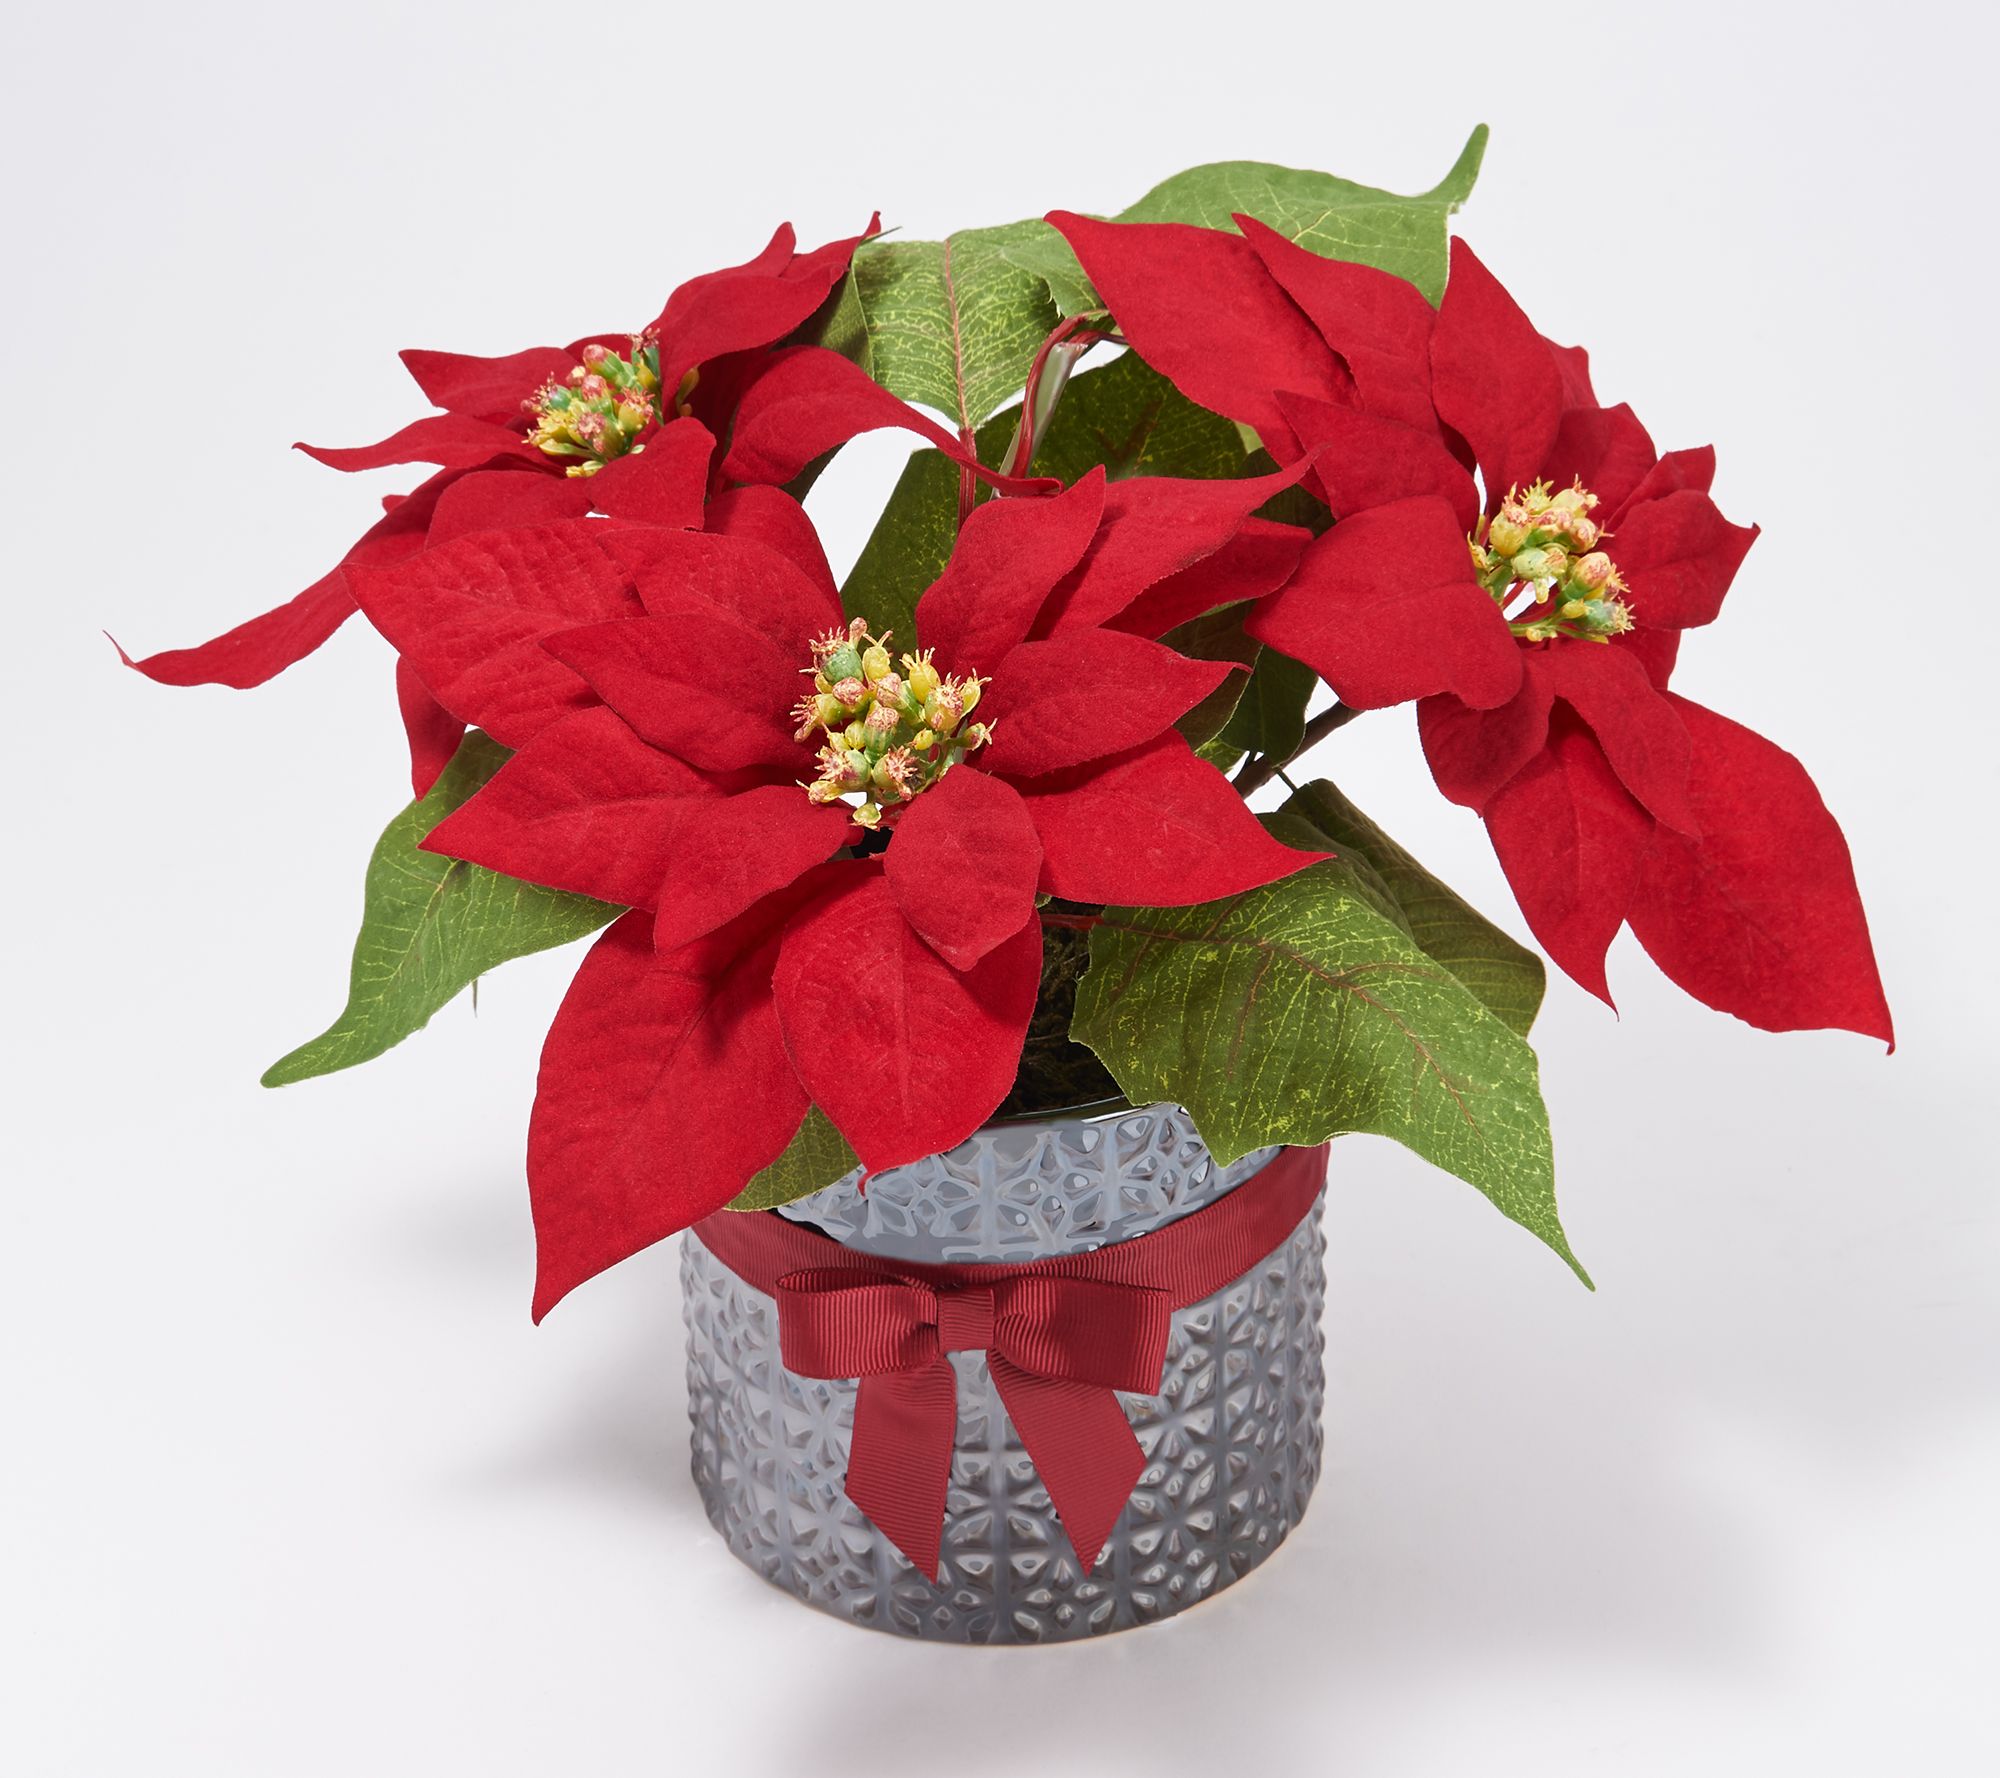 Faux Poinsettia Plant in Textured Pot w/ Holiday Bow by Peony - QVC.com